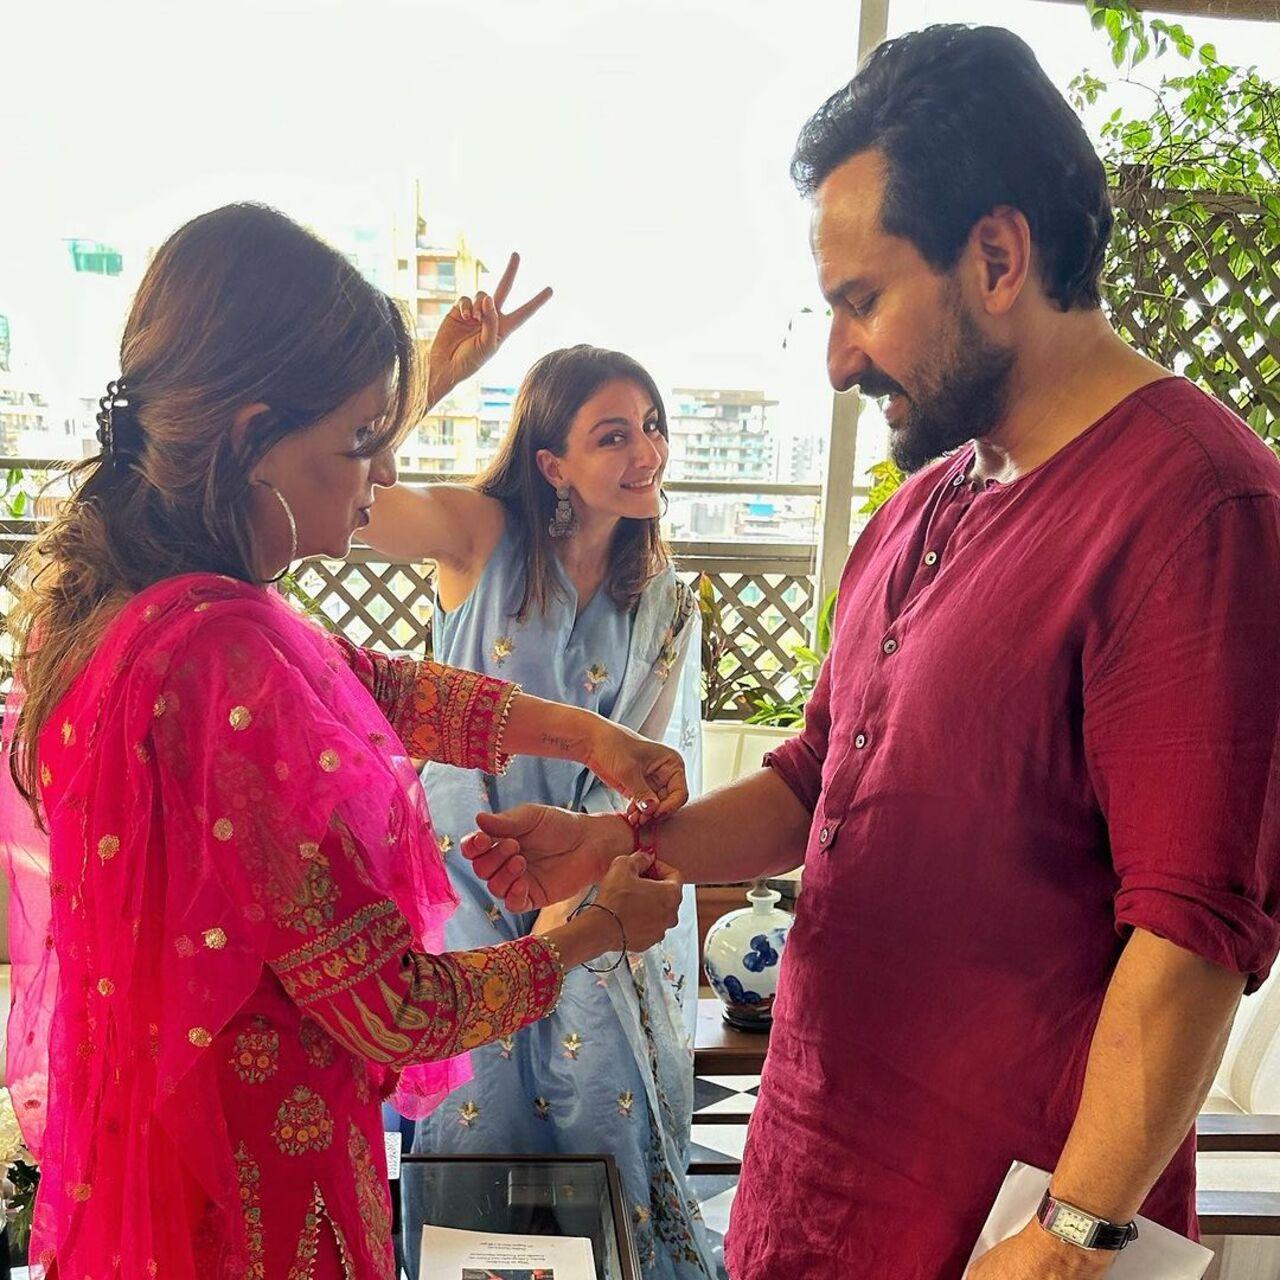 Saif Ali Khan who is the eldest son of Tiger Pataudi and Sharmila Tagore has two sisters- Soha Ali Khan and Saba Pataudi. Soha shared pictures of her and Saba tying rakhi to Saif 